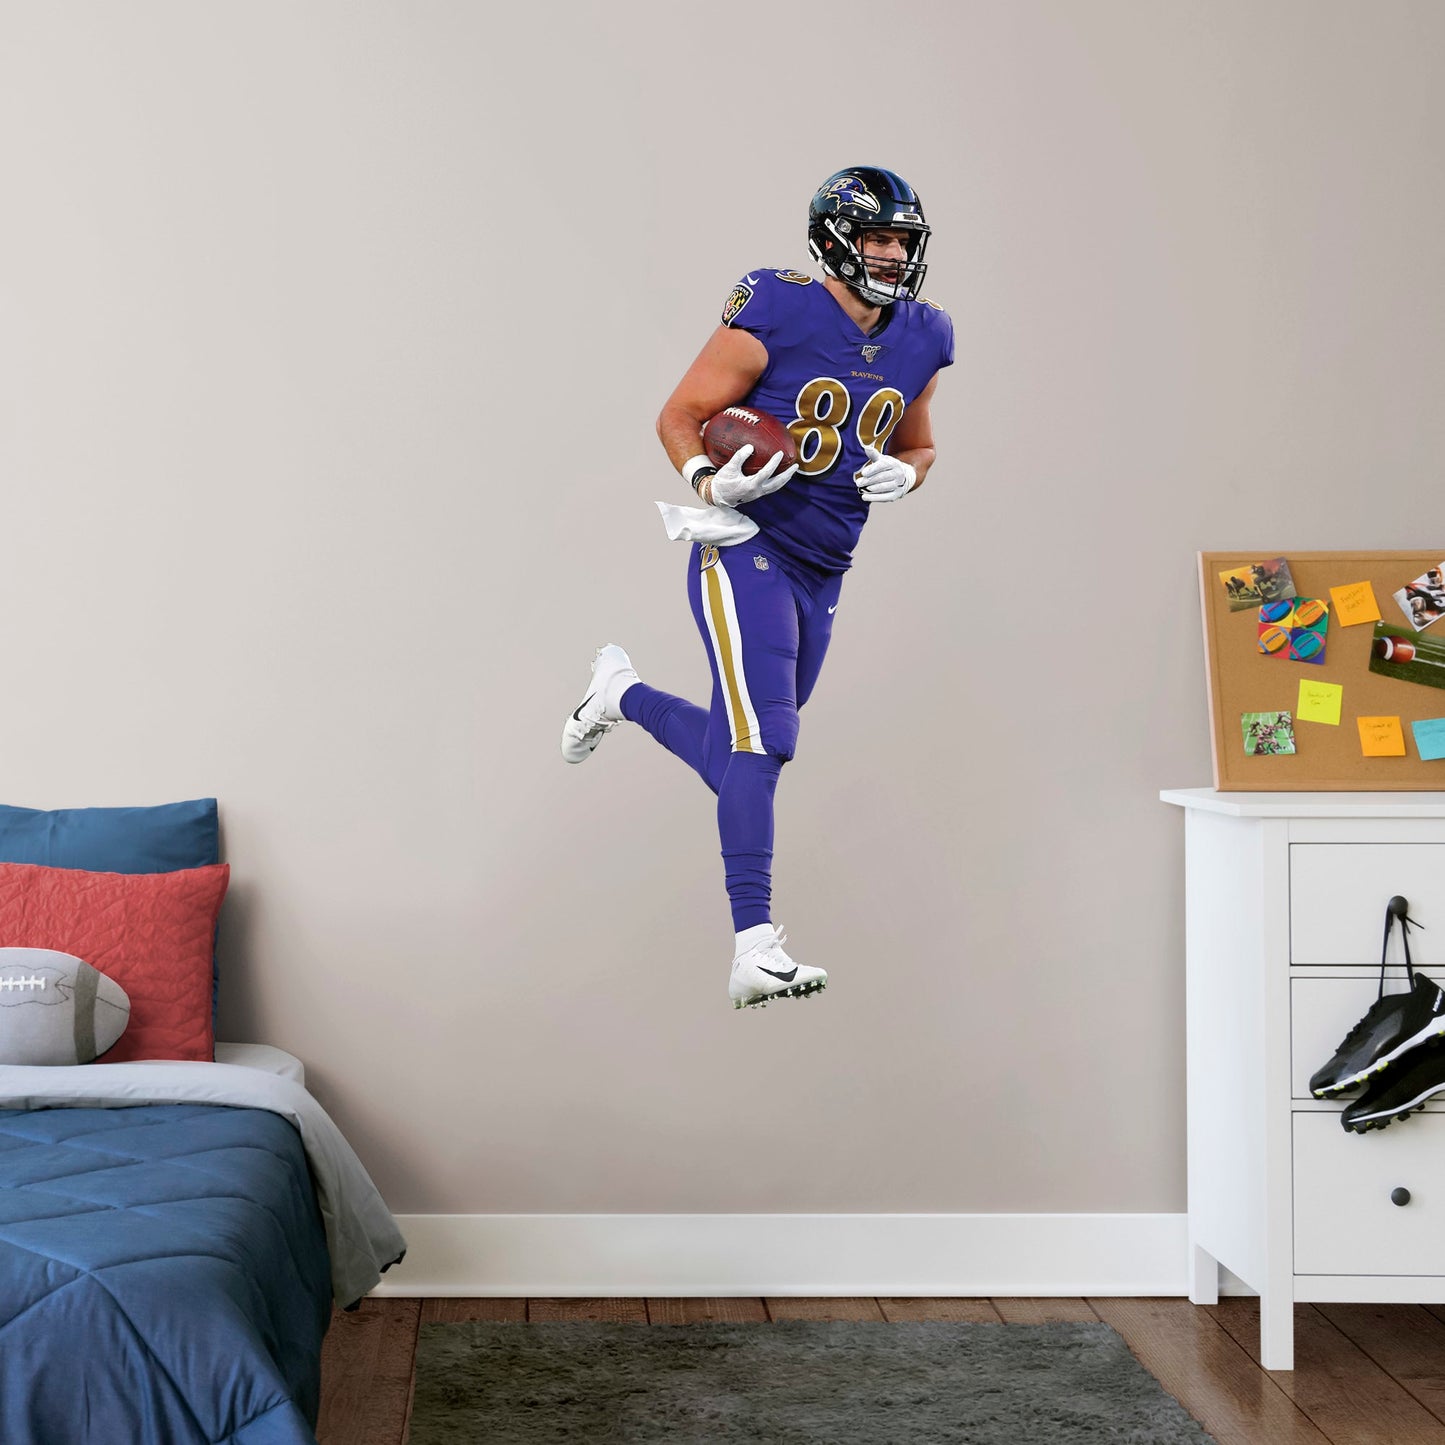 Giant Athlete + 2 Decals (24"W x 51"H) Bring the action of the NFL into your home with a wall decal of Mark Andrews! High quality, durable, and tear resistant, you'll be able to stick and move it as many times as you want to create the ultimate football experience in any room!